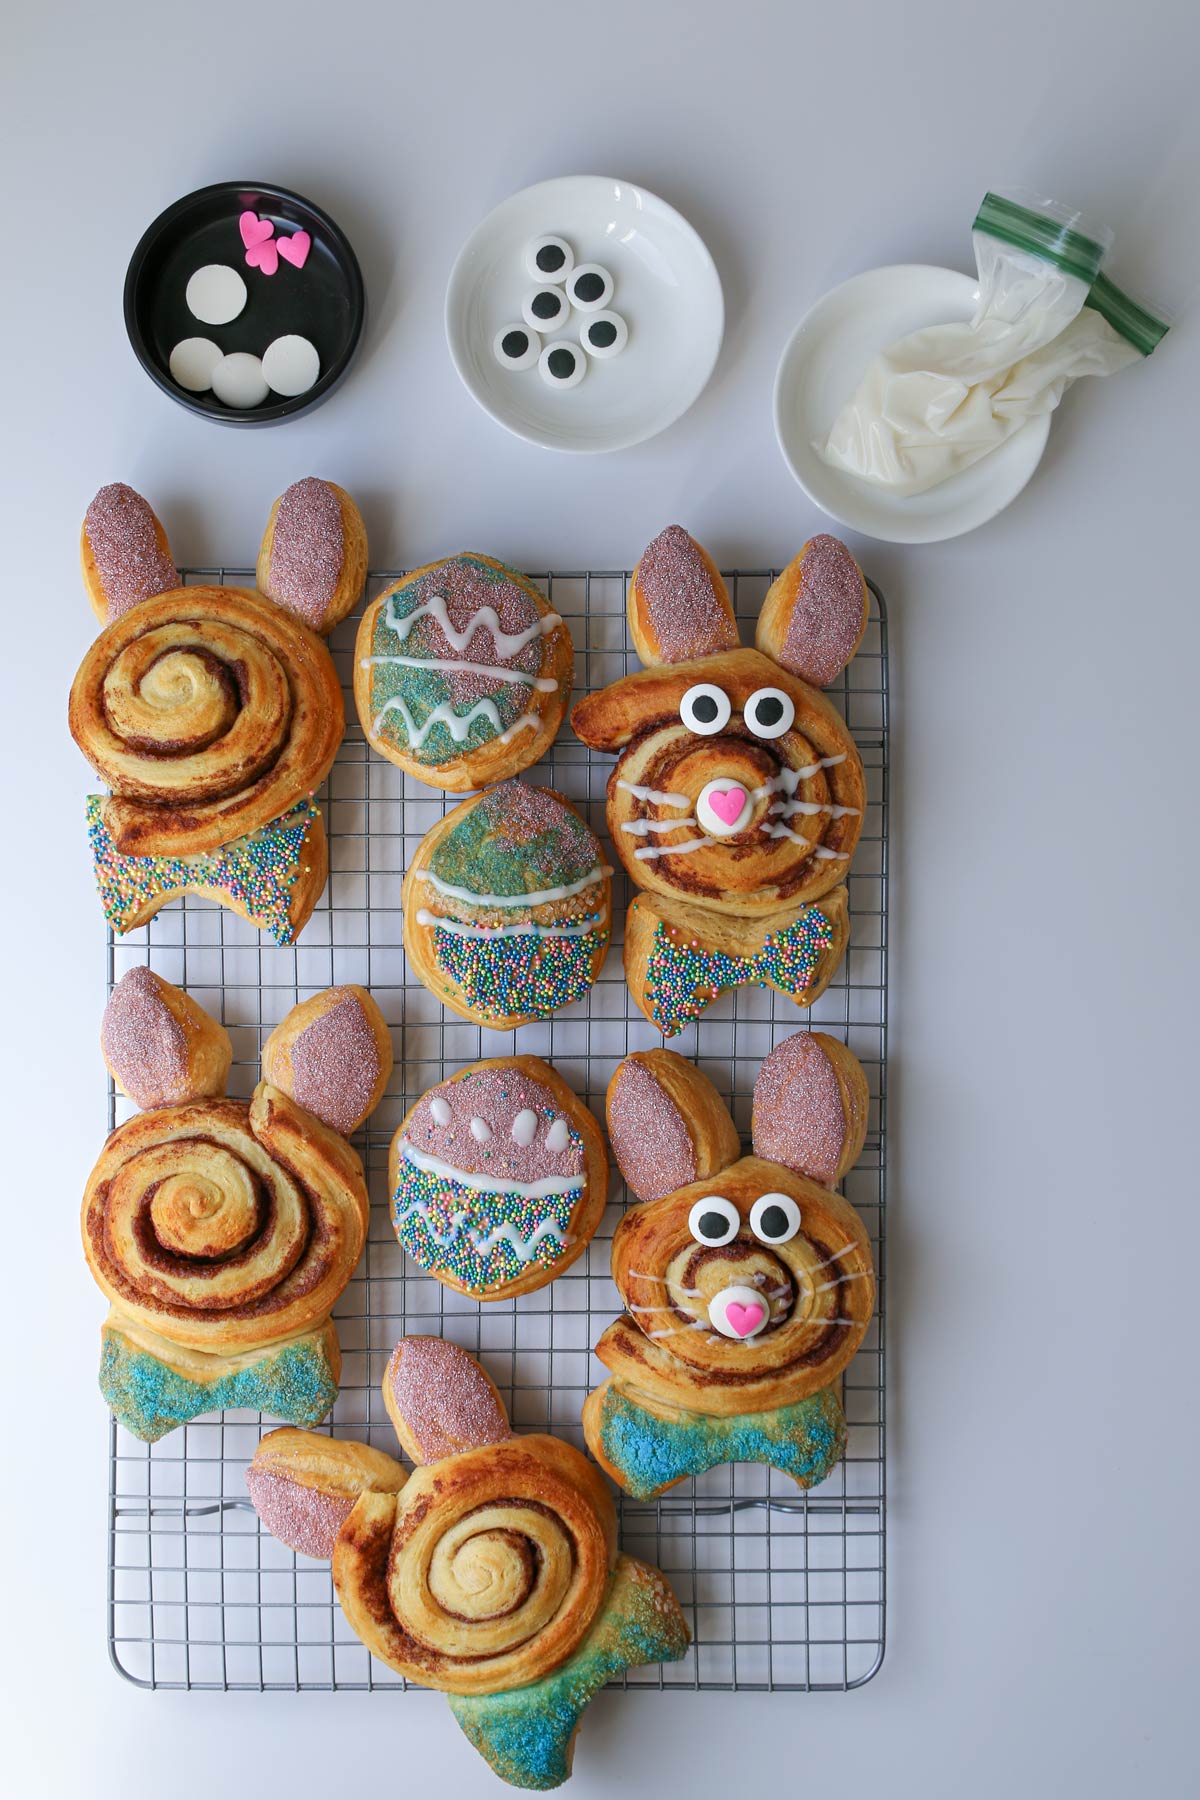 adding details with frosting and candy to bunnies and eggs.